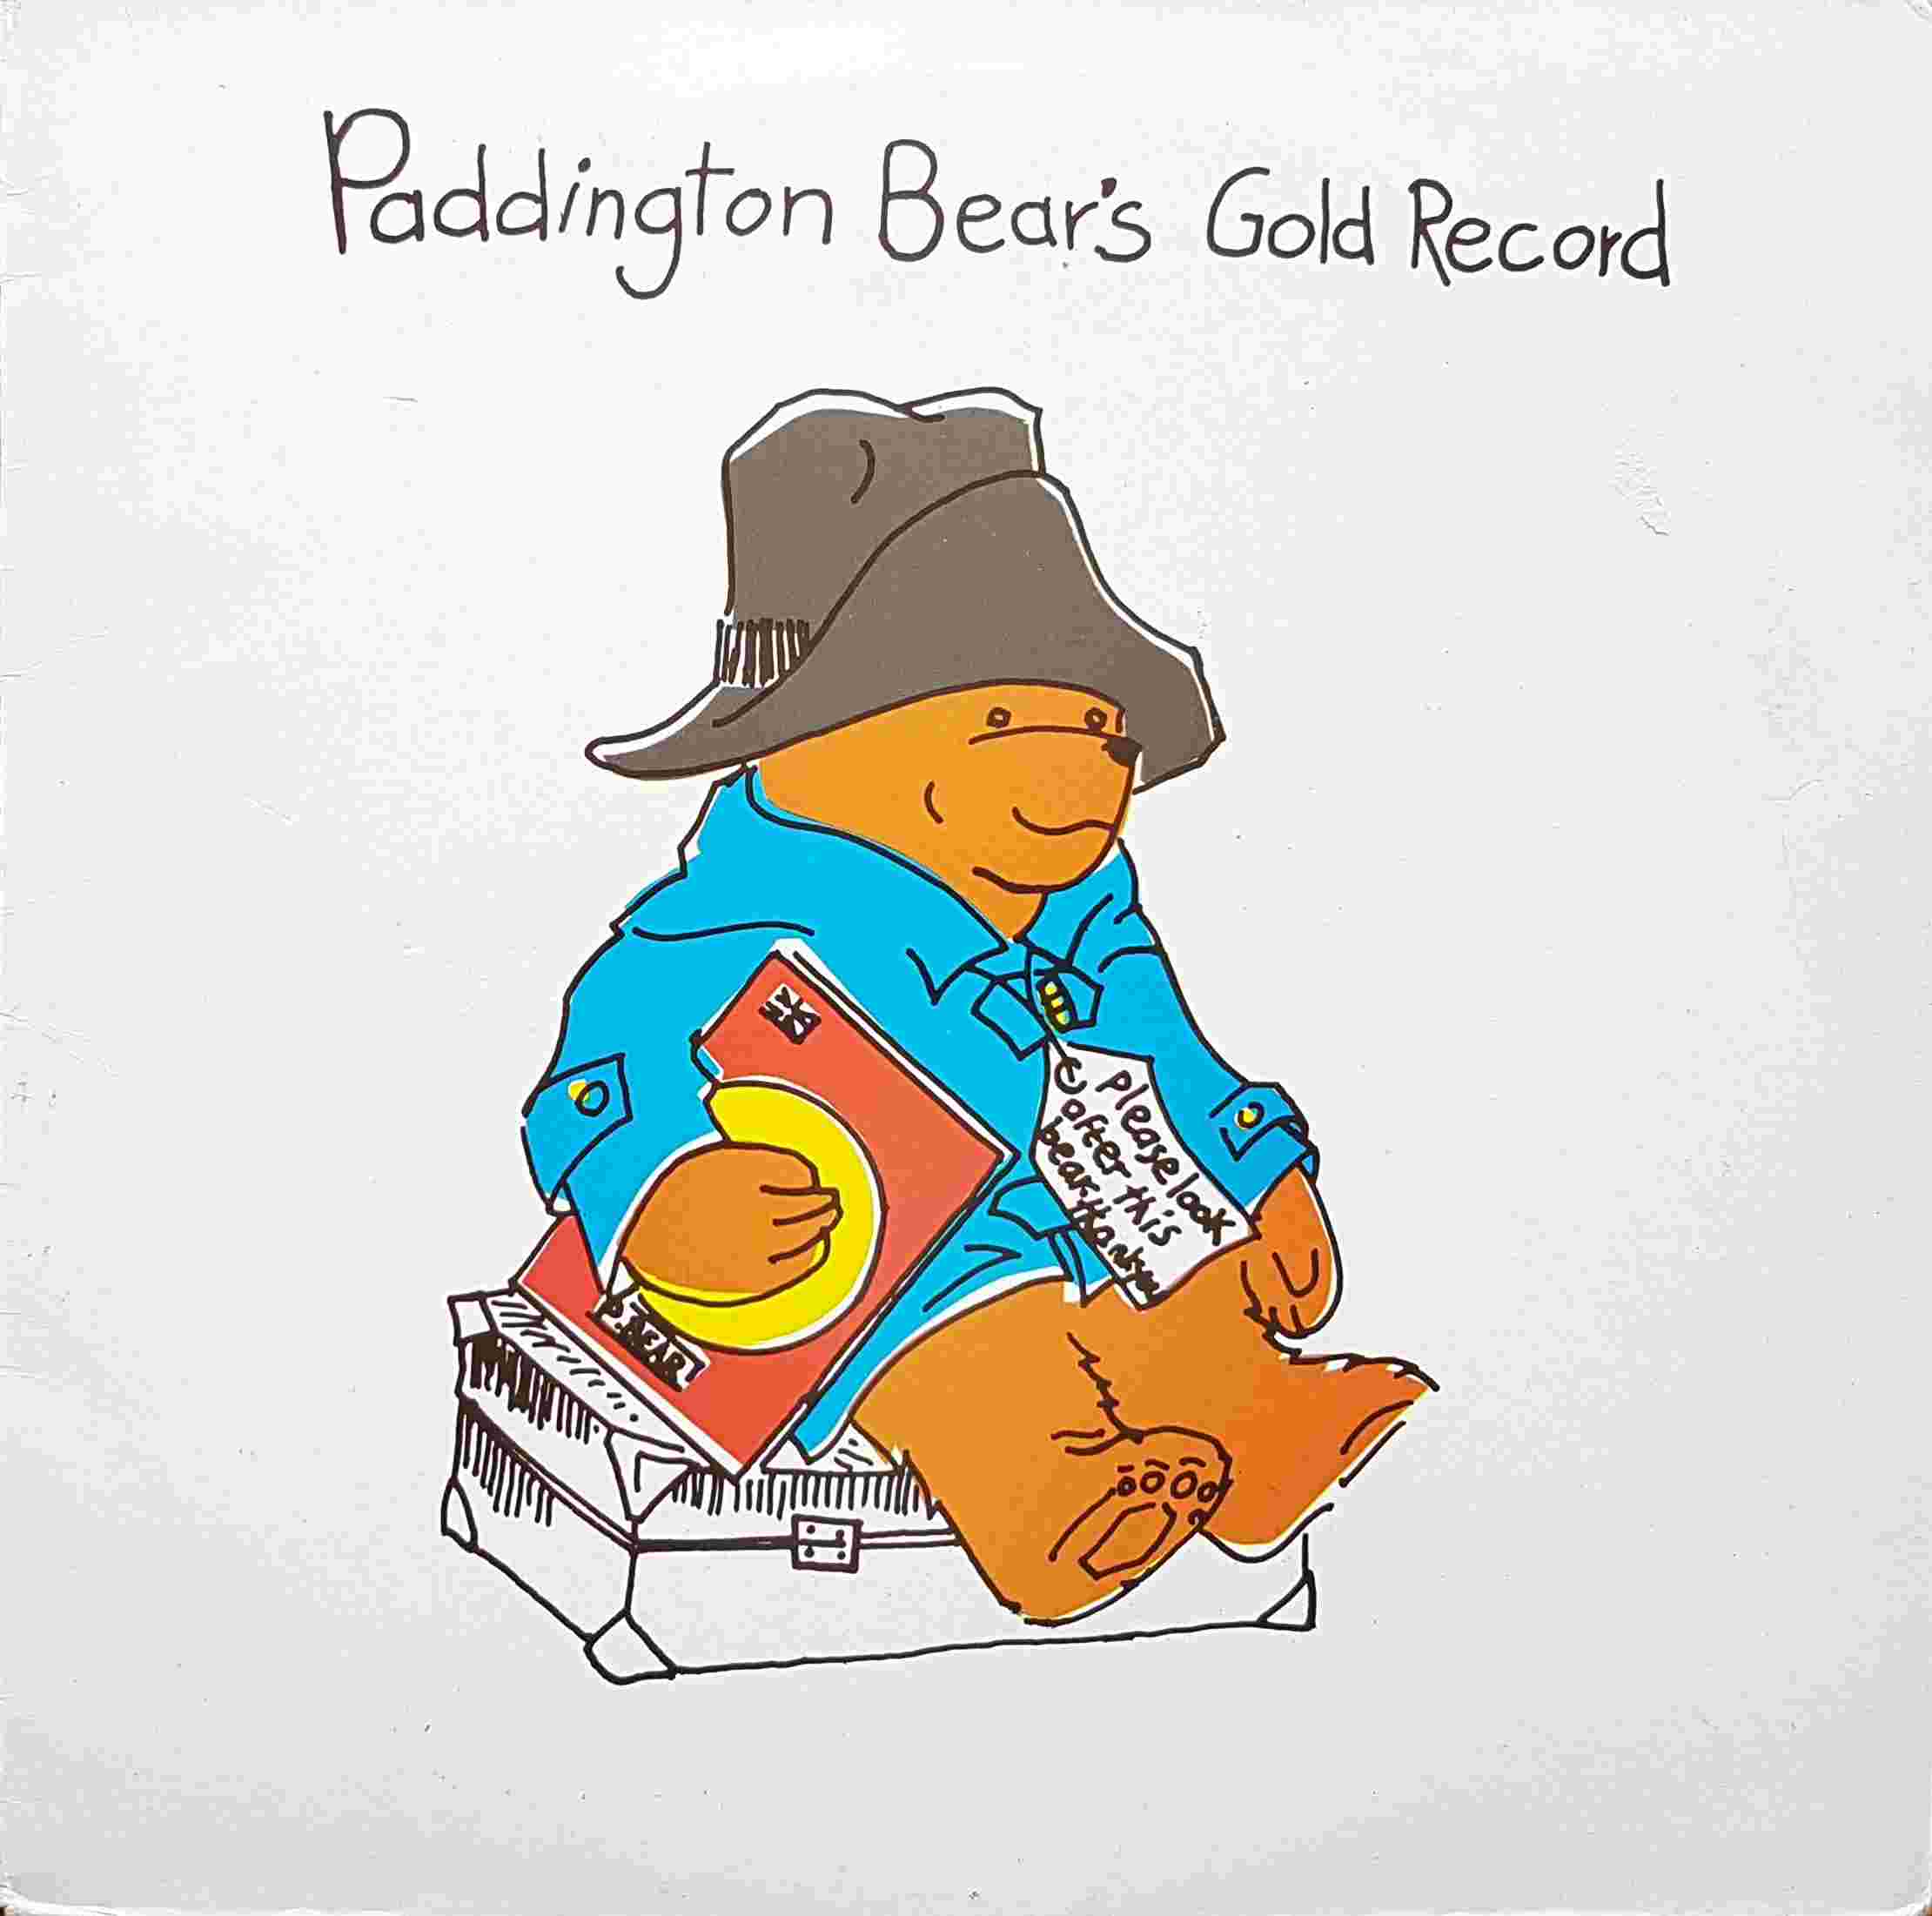 Picture of ATXLP 07 Paddington Bear's gold record by artist Various from ITV, Channel 4 and Channel 5 library